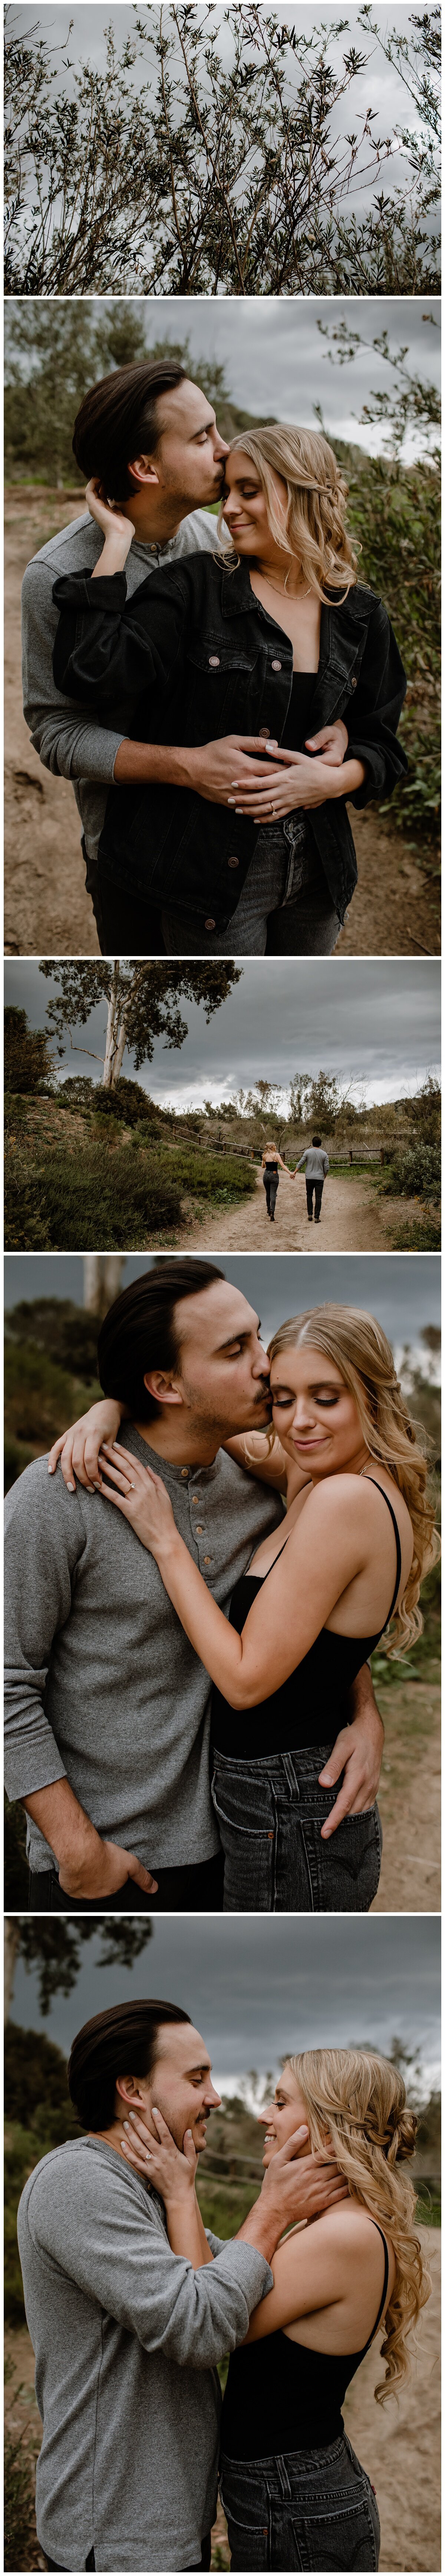 Carbon Canyon Park Orange County - Madeline and Scott Engagement Session - Eve Rox Photography-87_WEB.jpg